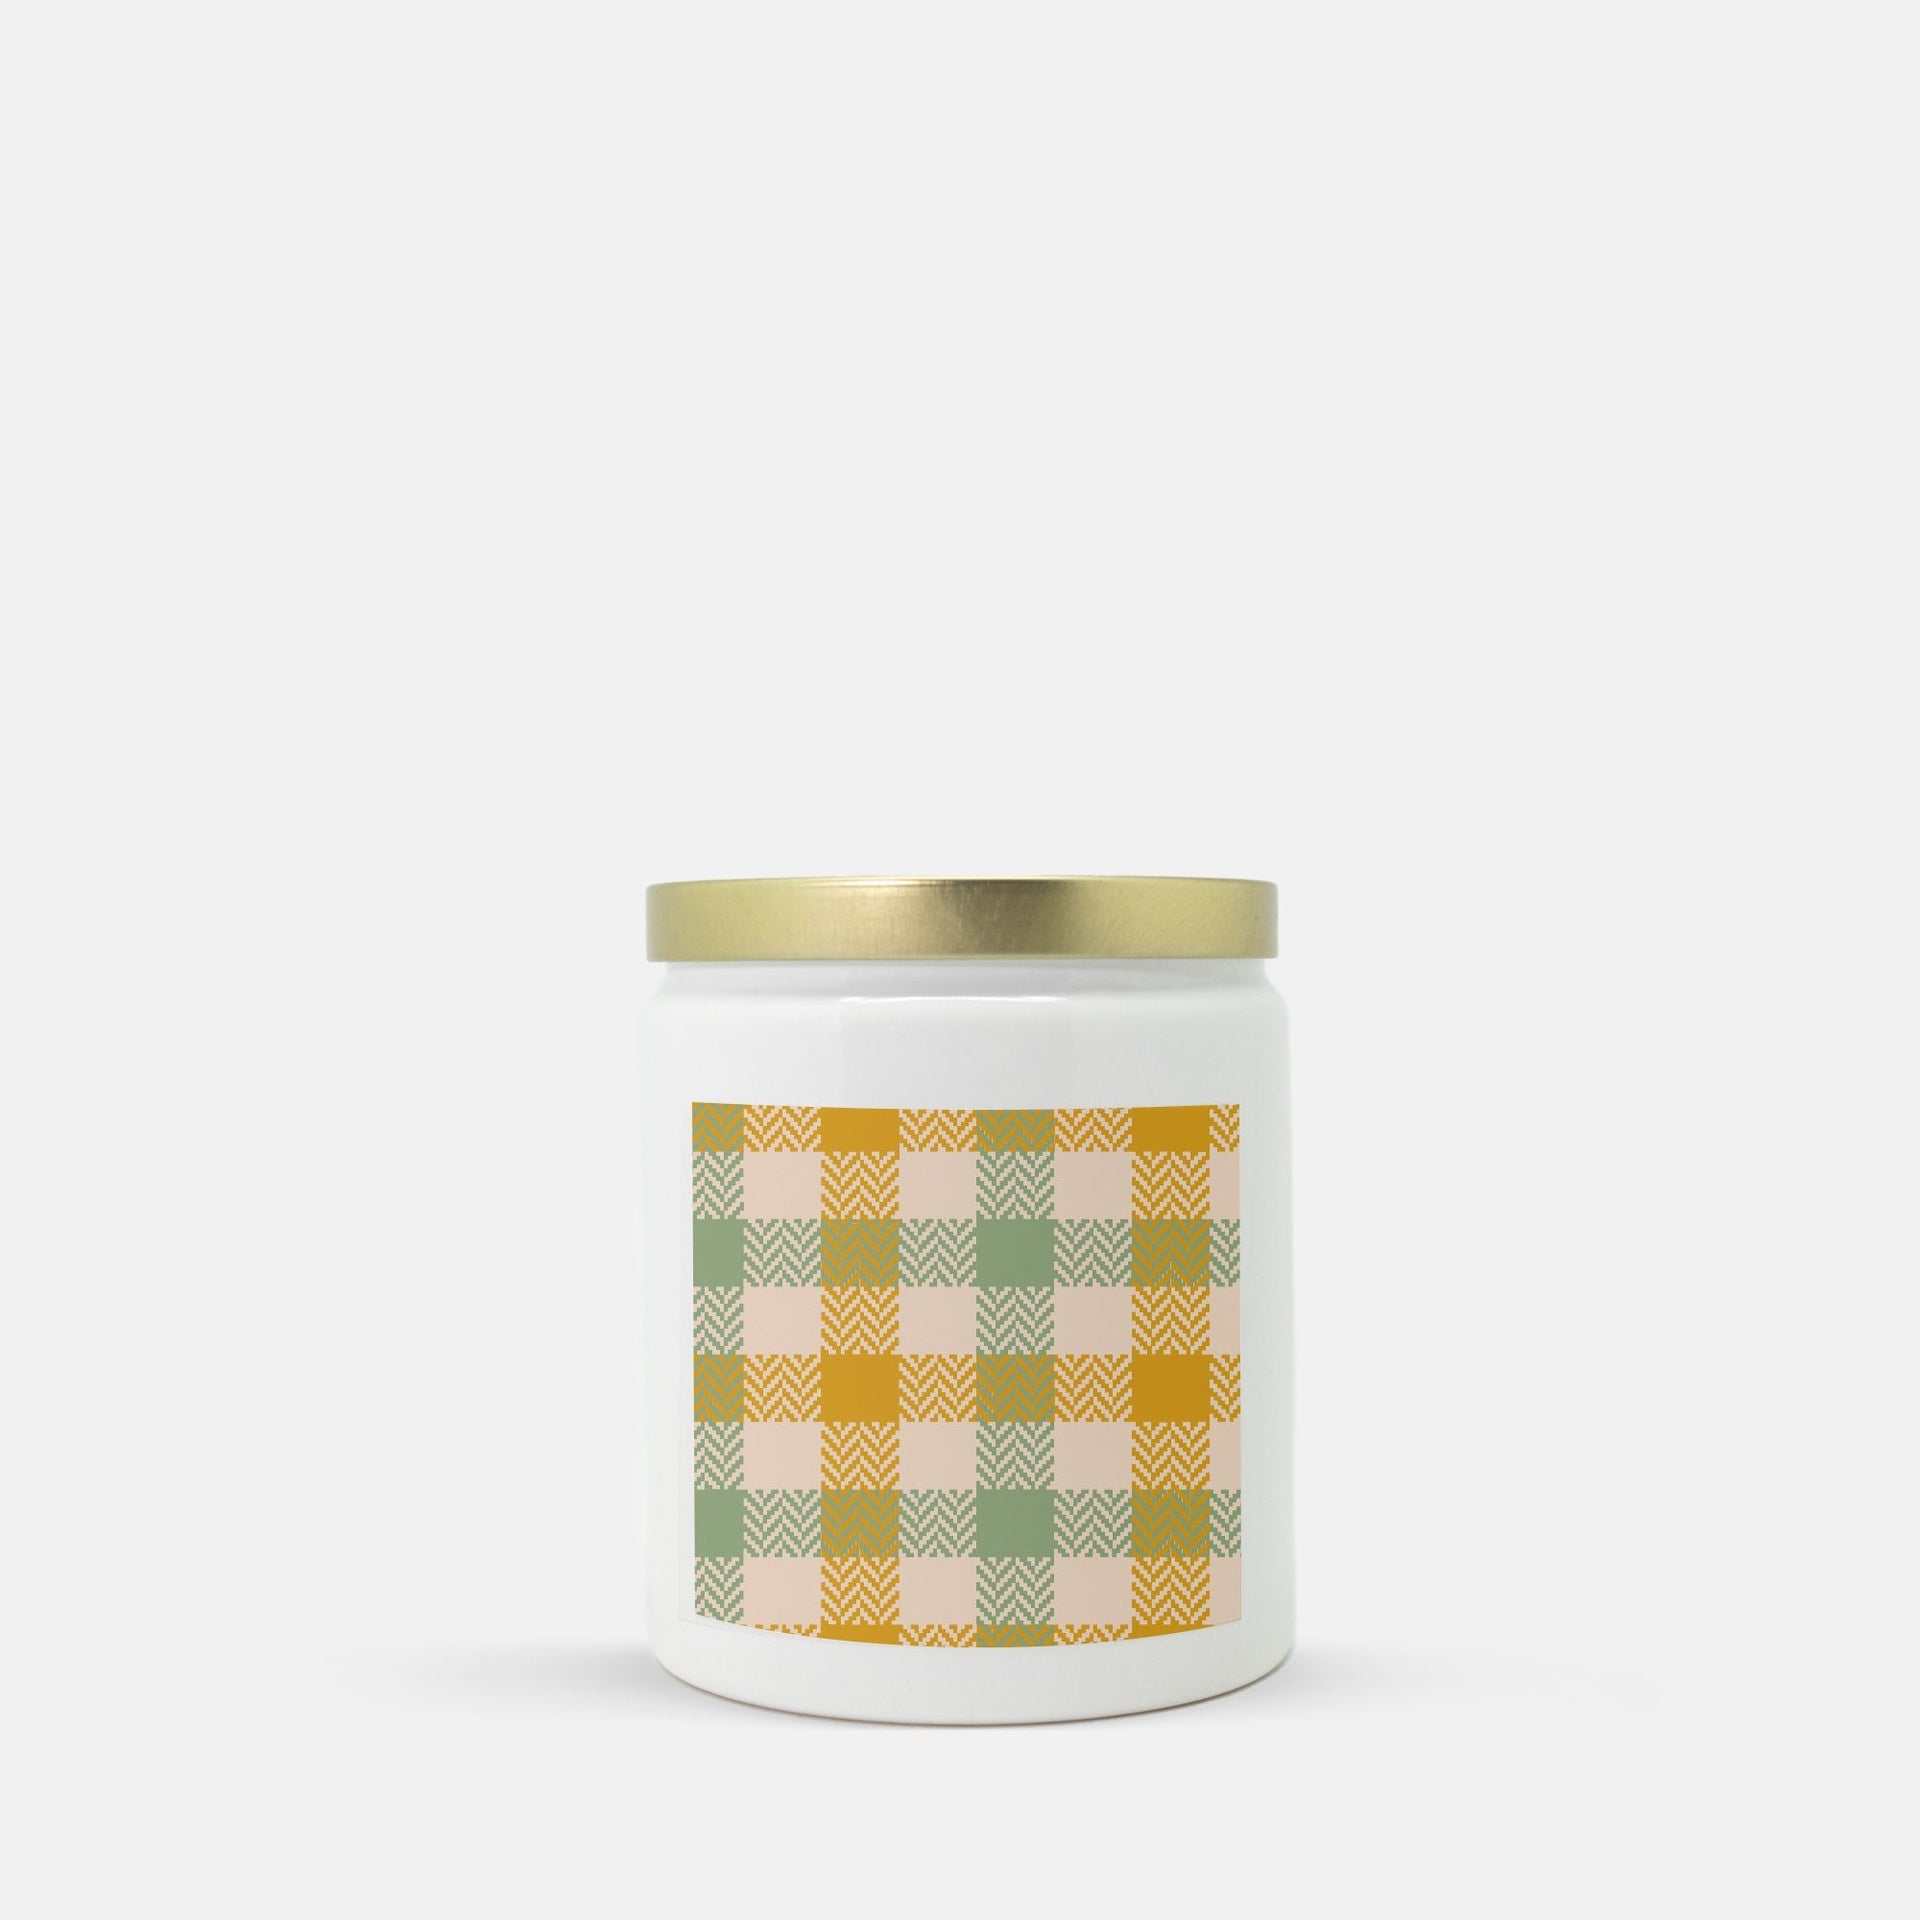 Lifestyle Details - Yellow & Green Plaid Ceramic Candle - Gold Lid - Vanilla Bean